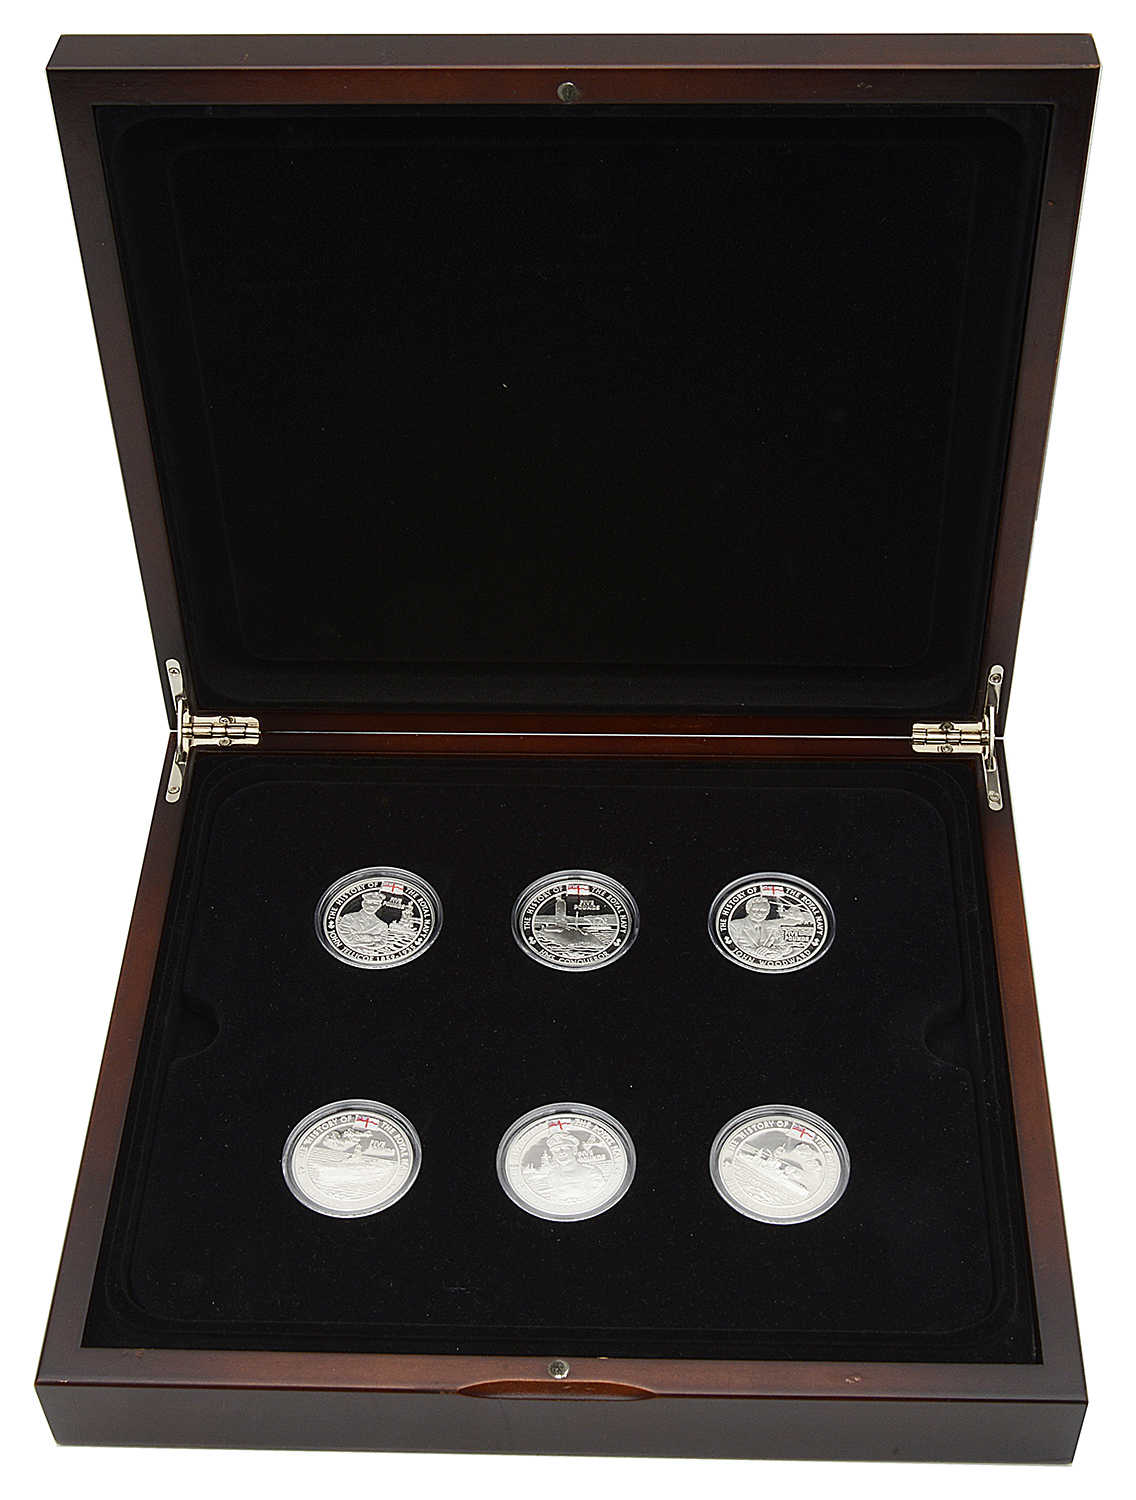 The Royal Mint - The History of the British Navy, a set of 18 .925 silver £5 proof coins